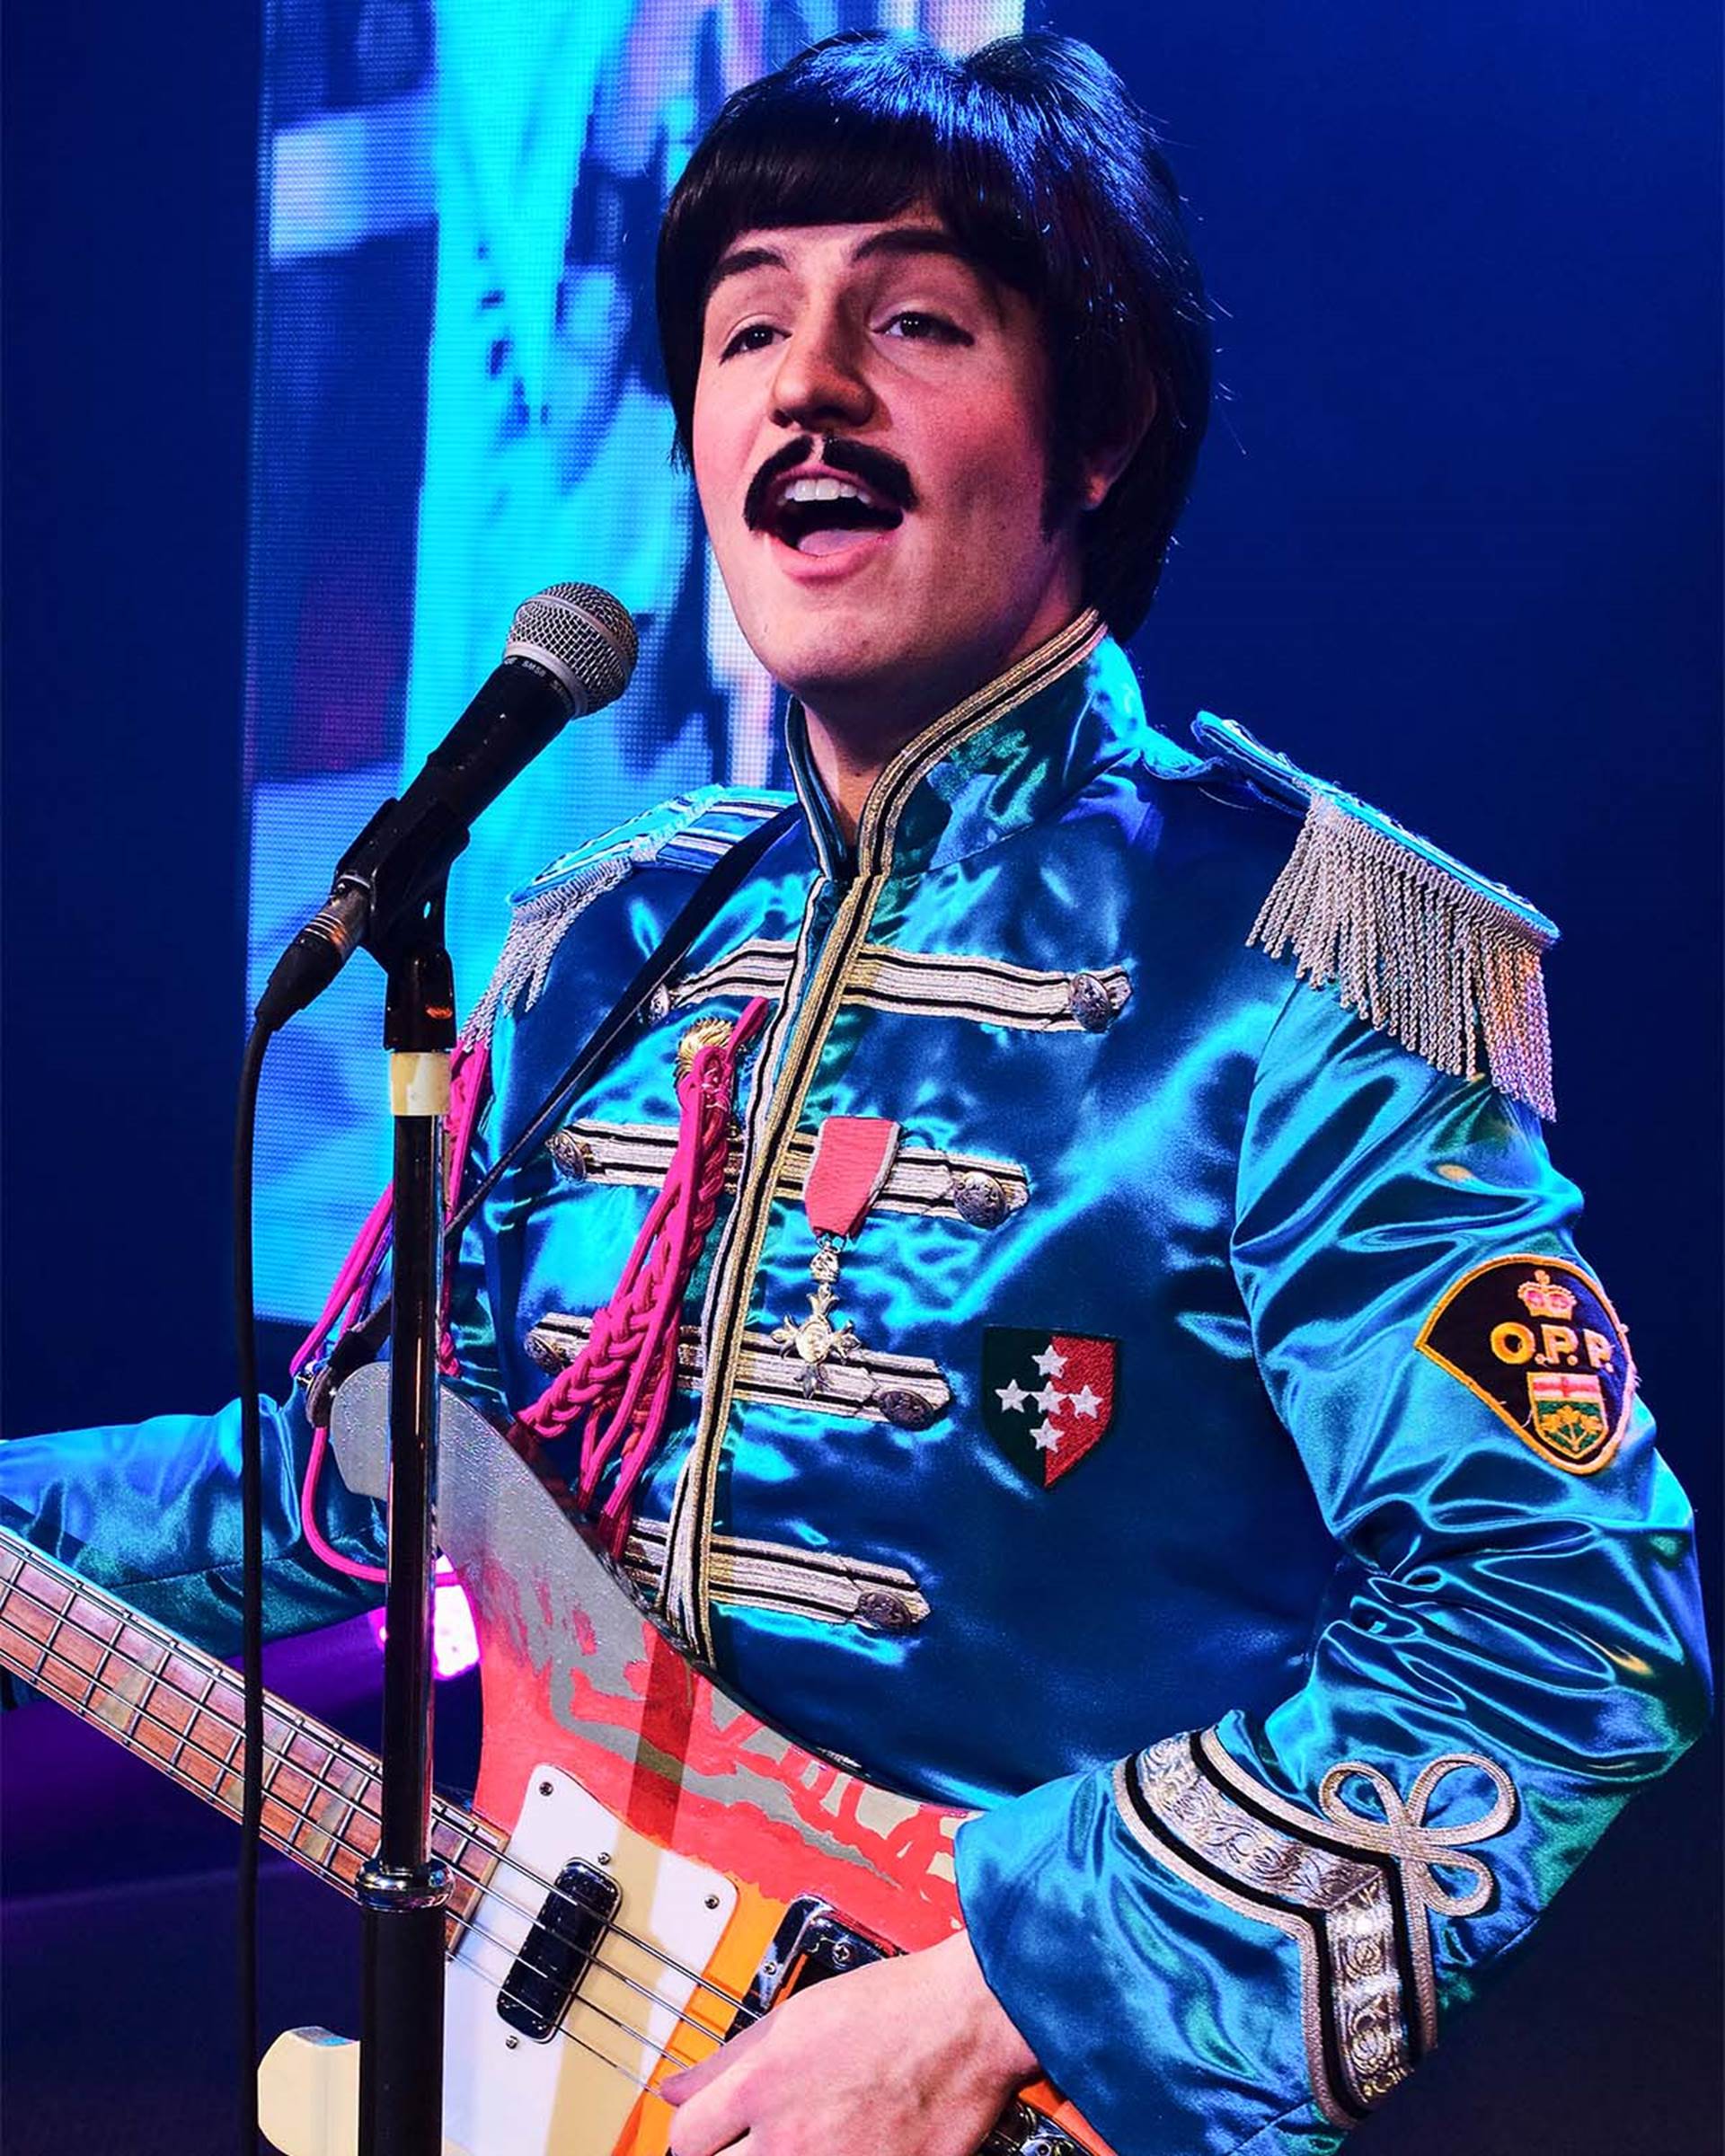 A Paul McCartney impersonator wearing a blue Seargent Peppers outfit and holding a guitar. He has dark hair and a moustache